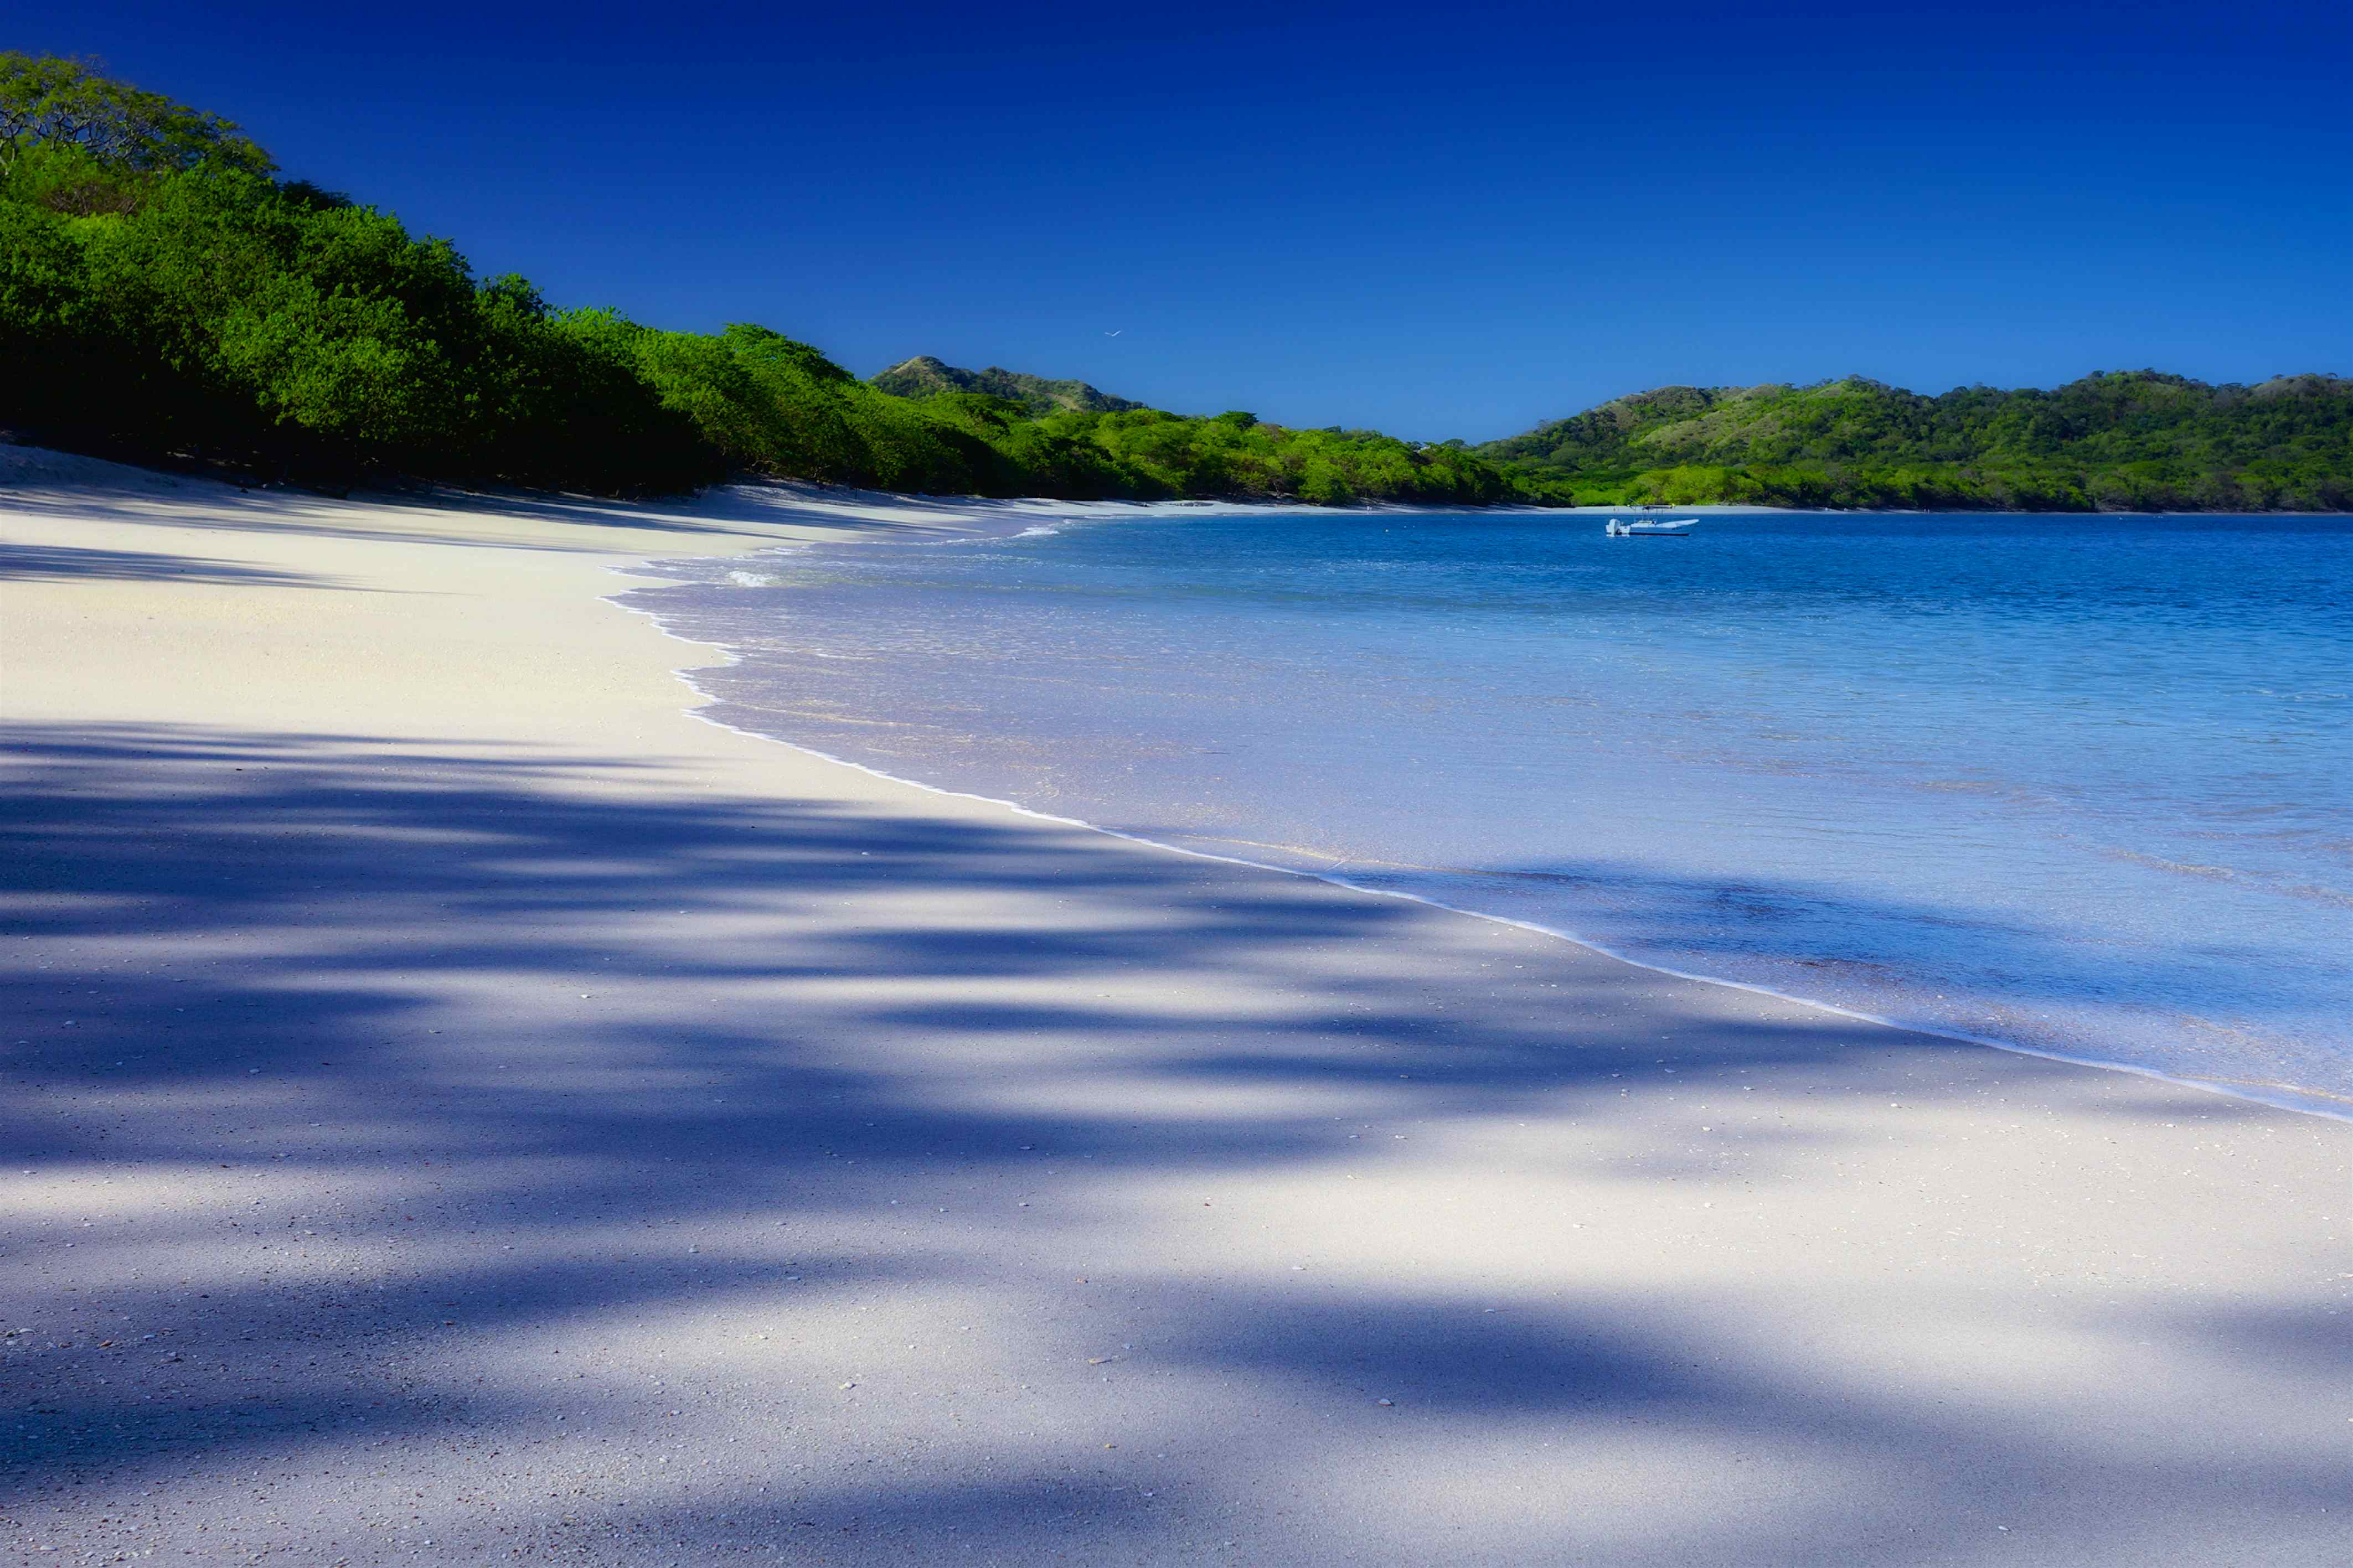 The Most Beautiful Beach in Costa Rica: Discovering the Top Pick - PlantHD